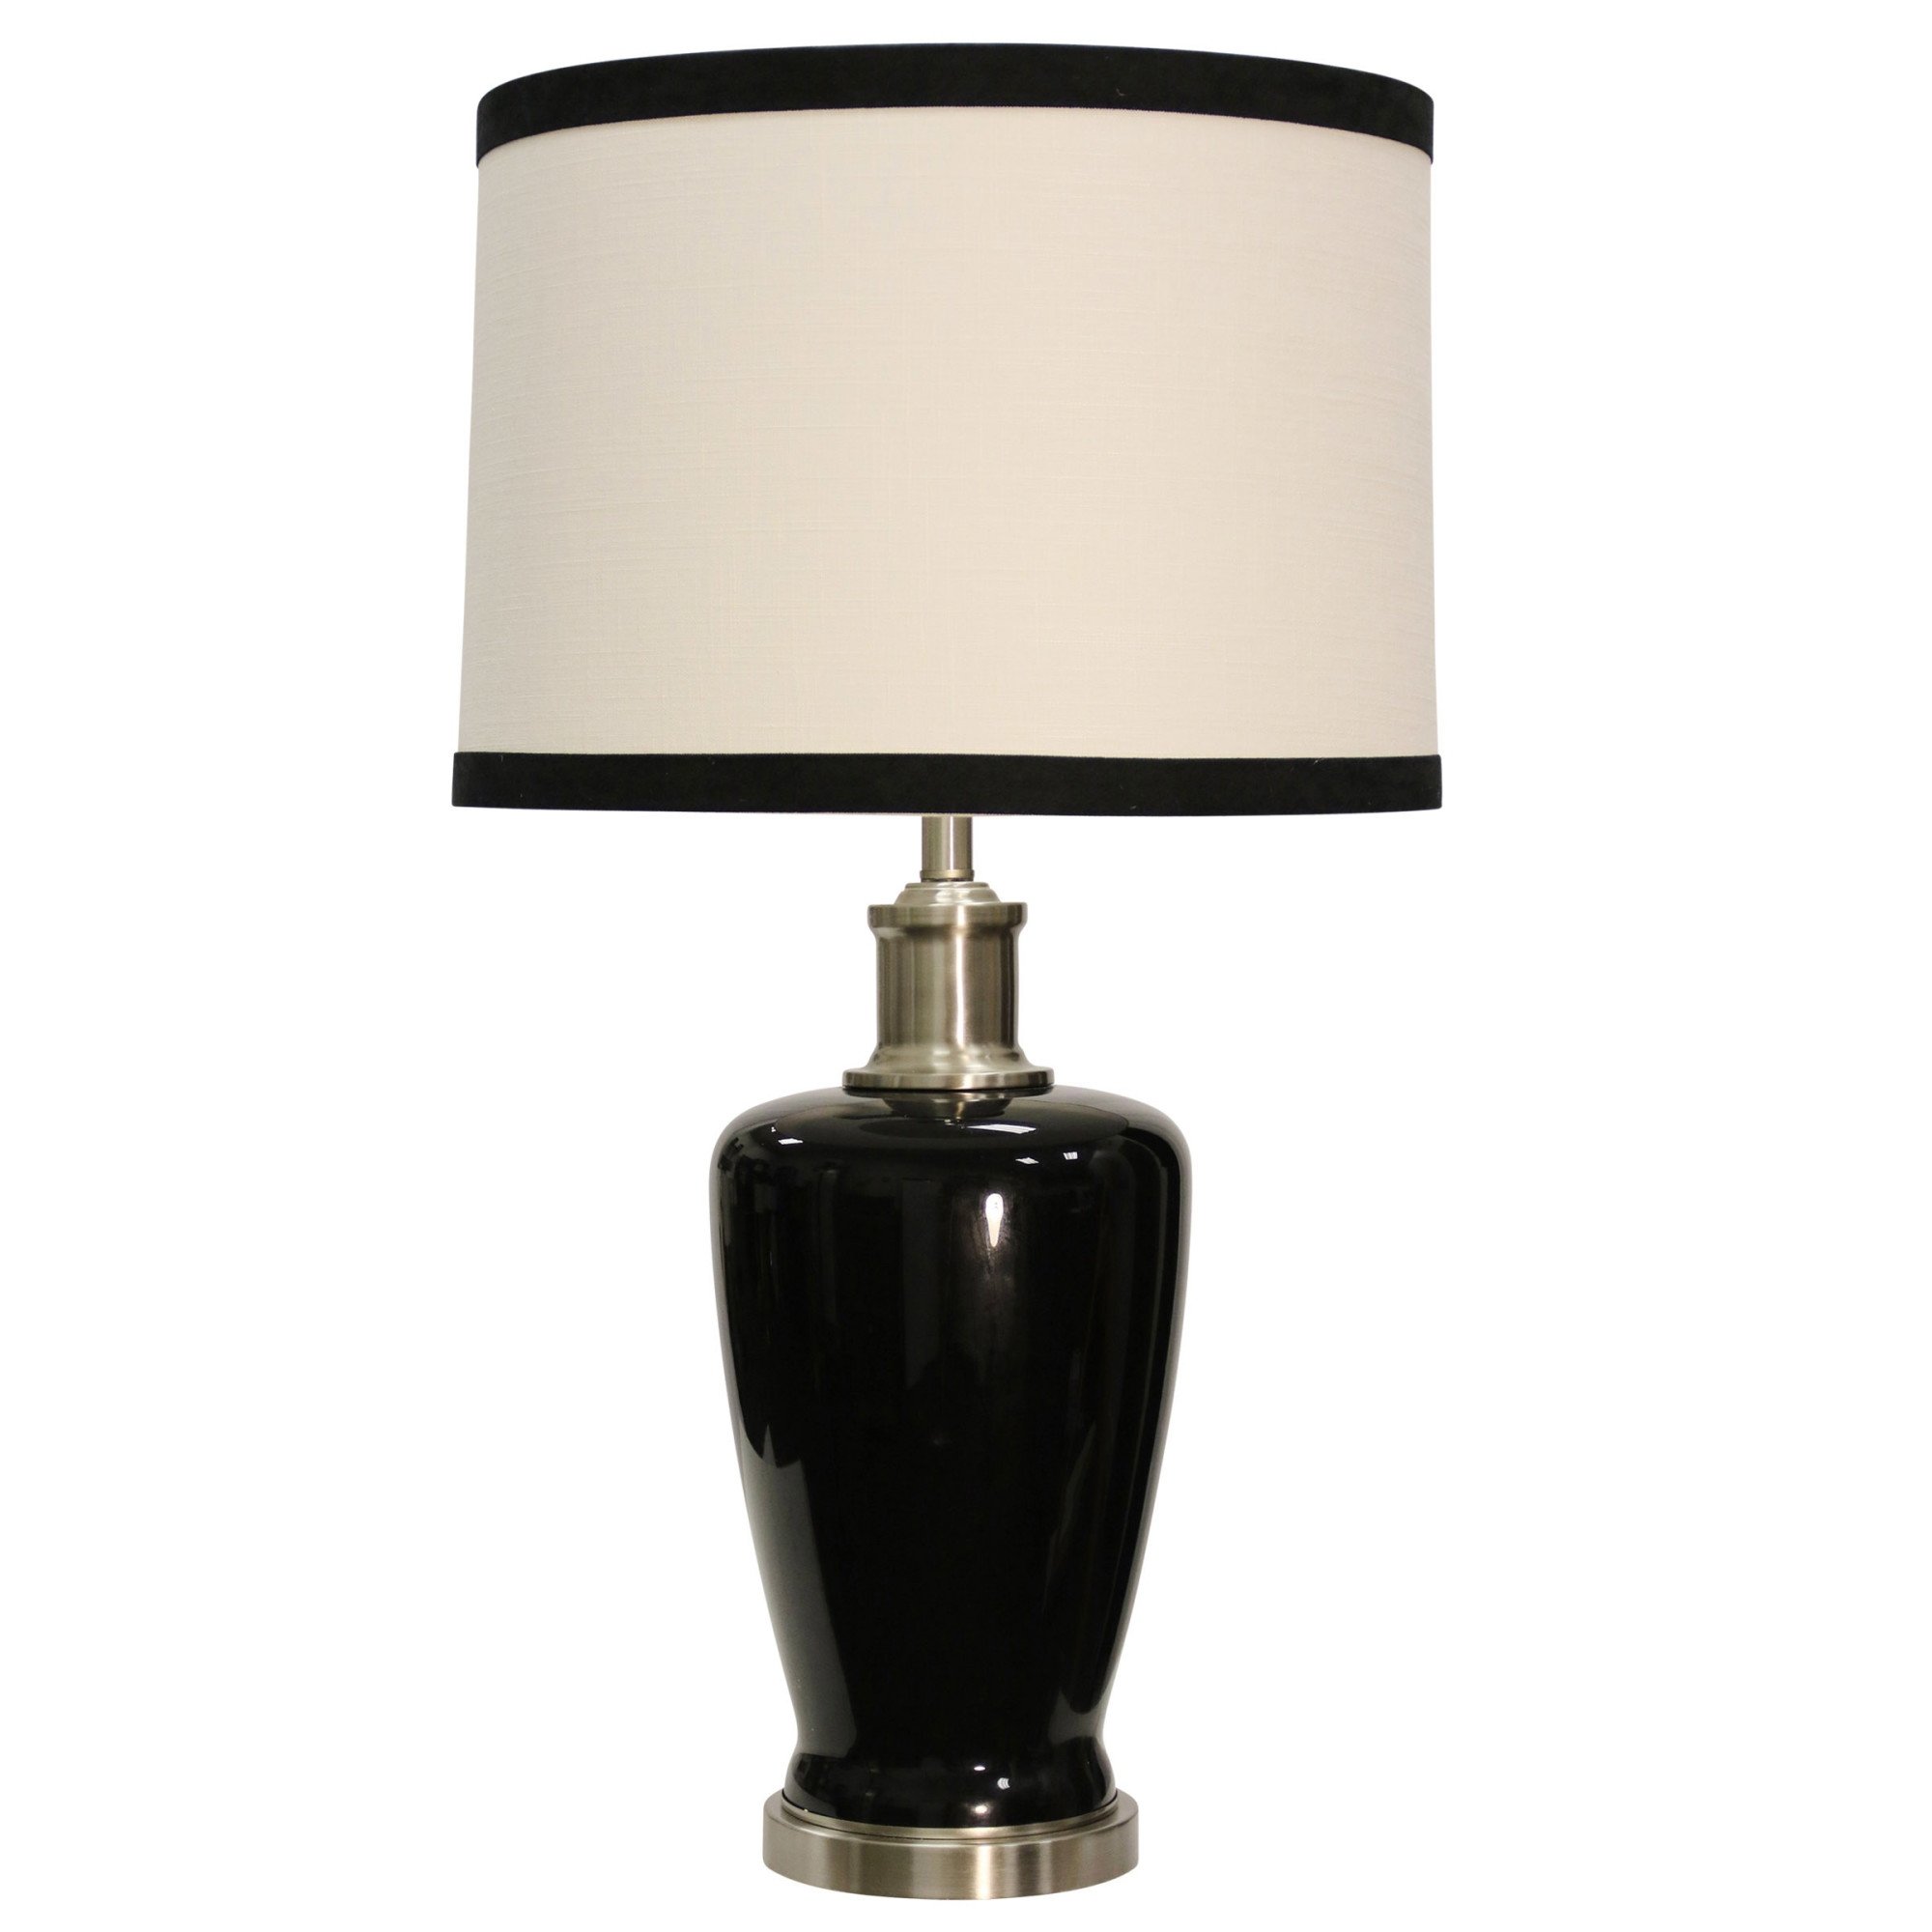 delacora bikaner tall accent table lamp with hardback fabric shade lamps jet black free shipping today inch tablecloth modern farmhouse coffee battery operated lighting round